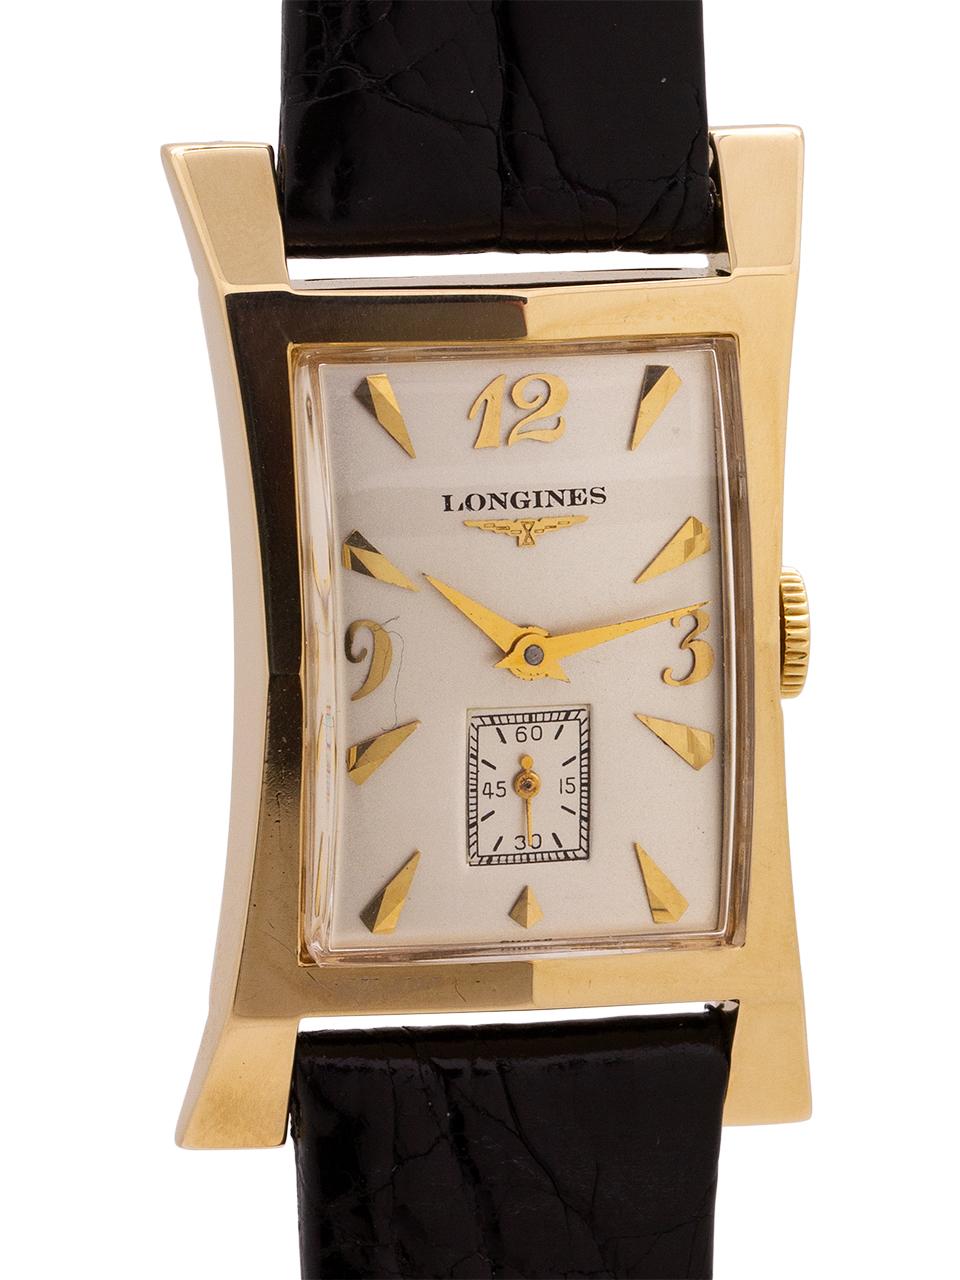 
Longines 14K YG  elongated hour glass shaped case measuring 21mm at its narrowest, 27mm at its widest and 41mm lug to lug. Scarce vintage model in exceptional condition. With beautifully restored silver satin dial with gold raised indexes and gold